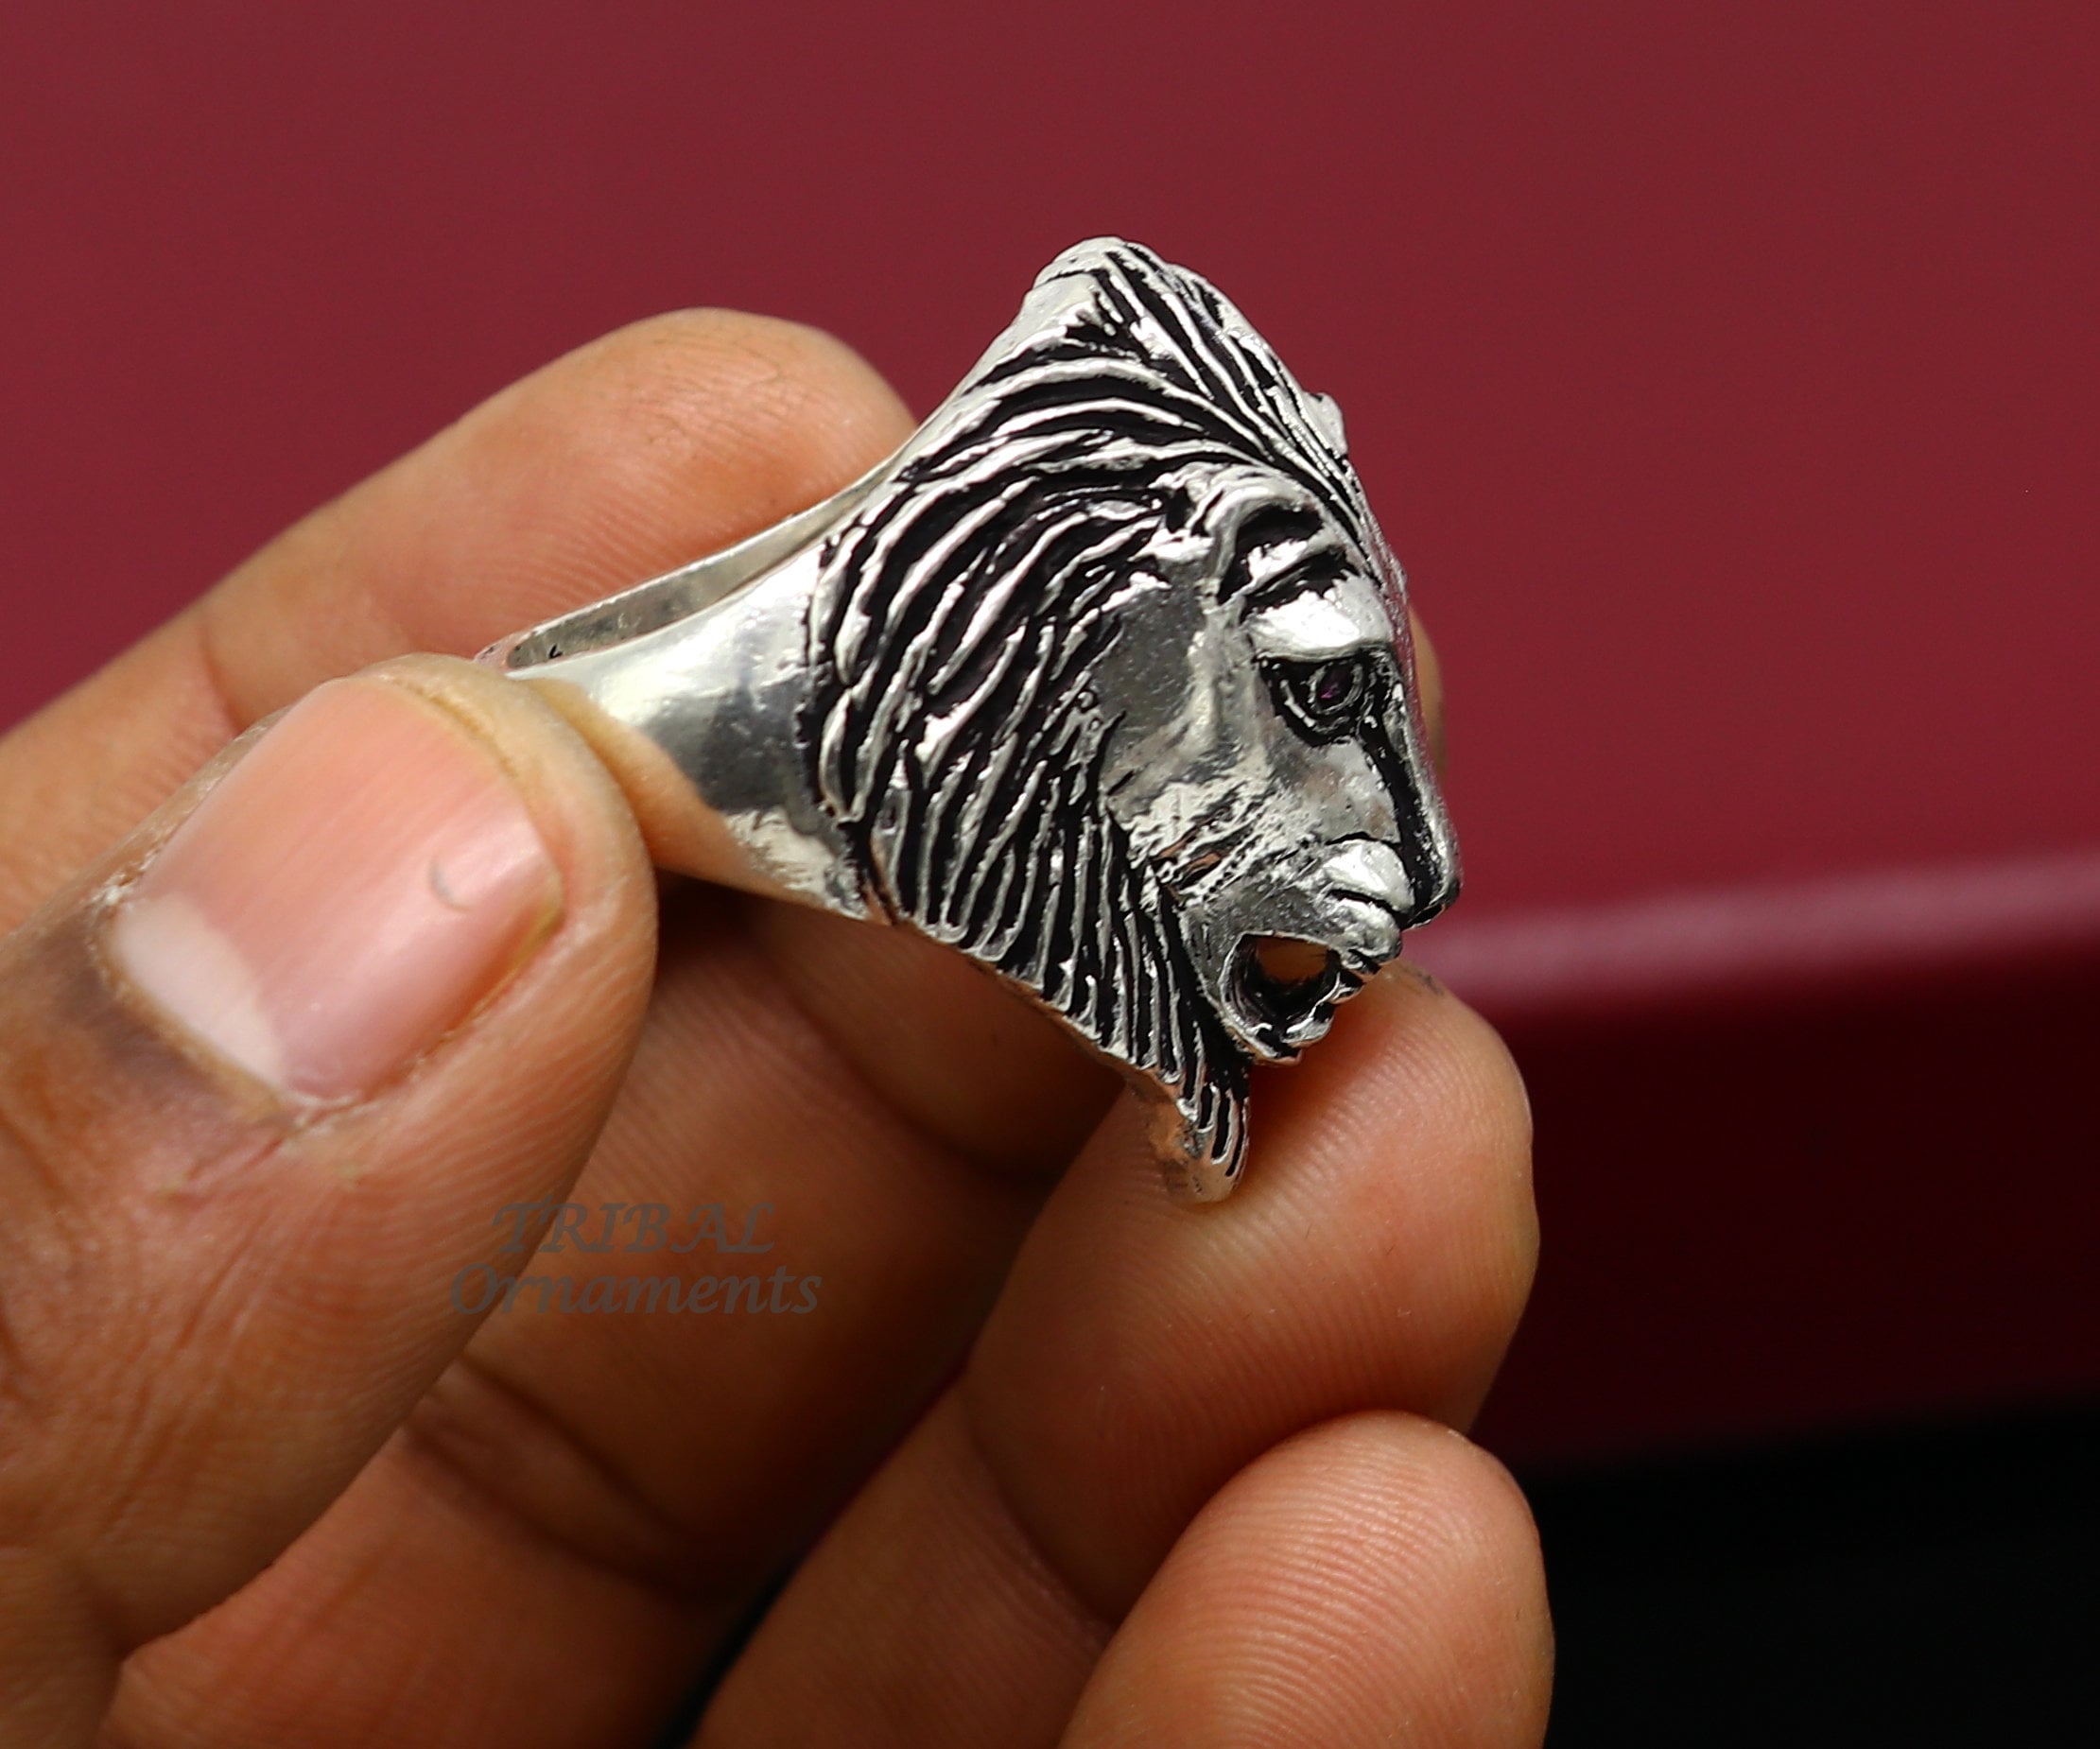 Buy 925 Sterling Silver Lion Ring, Vintage Lion Head Ring, 3D Feline Bling,  Big Cat Head Jewelry, Handmade Gifts for Him, Online in India - Etsy